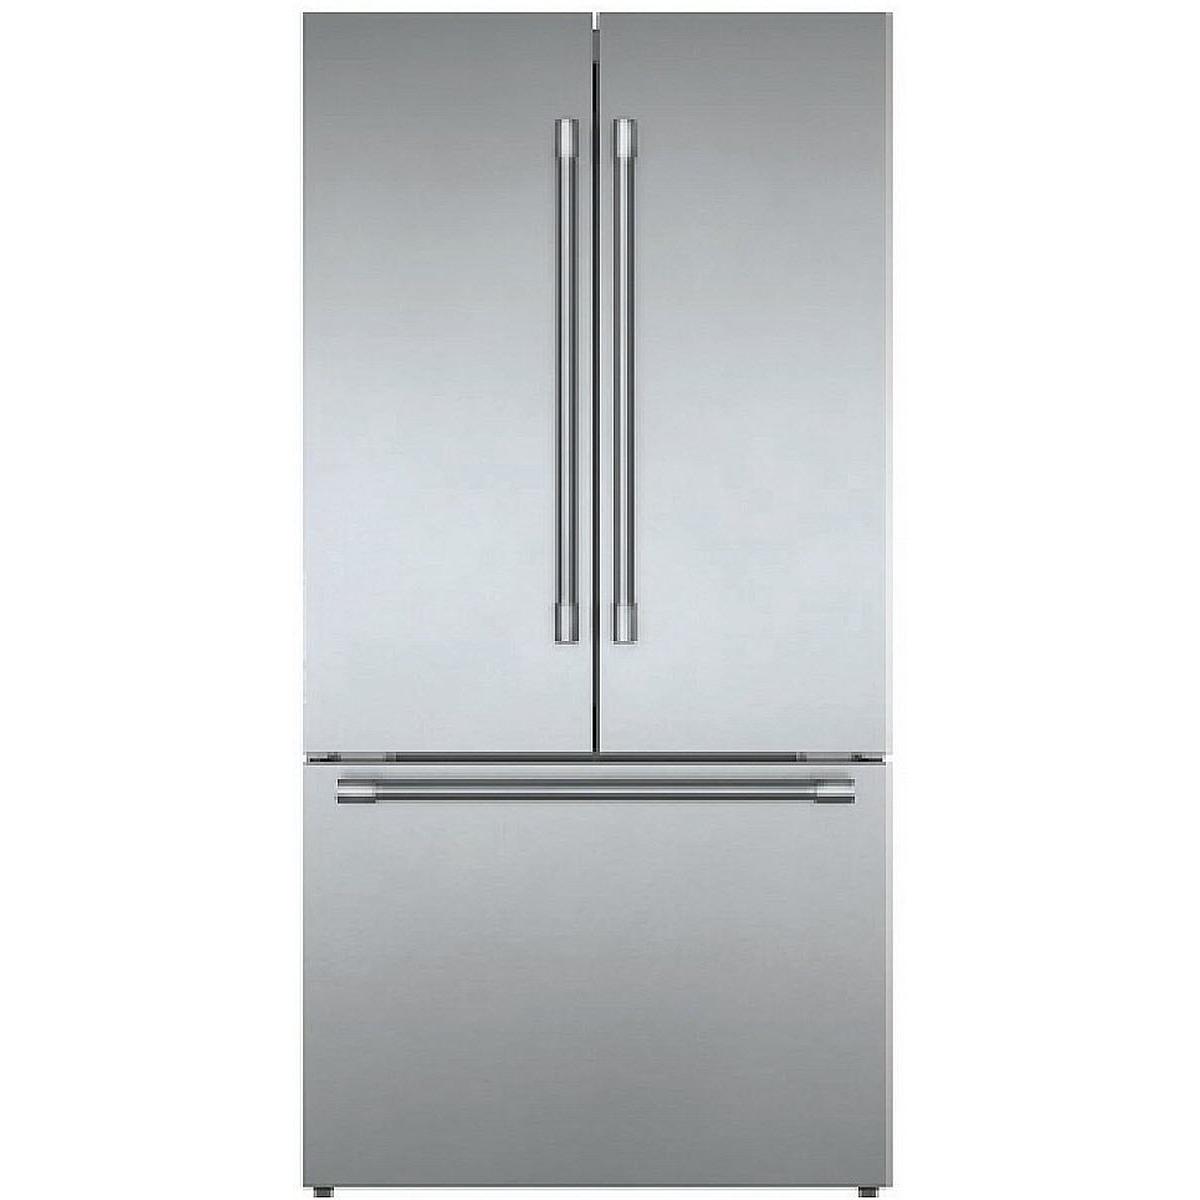 Thermador 36-inch Freestanding French 3-Door Refrigerator with Home Connect? T36FT820NS